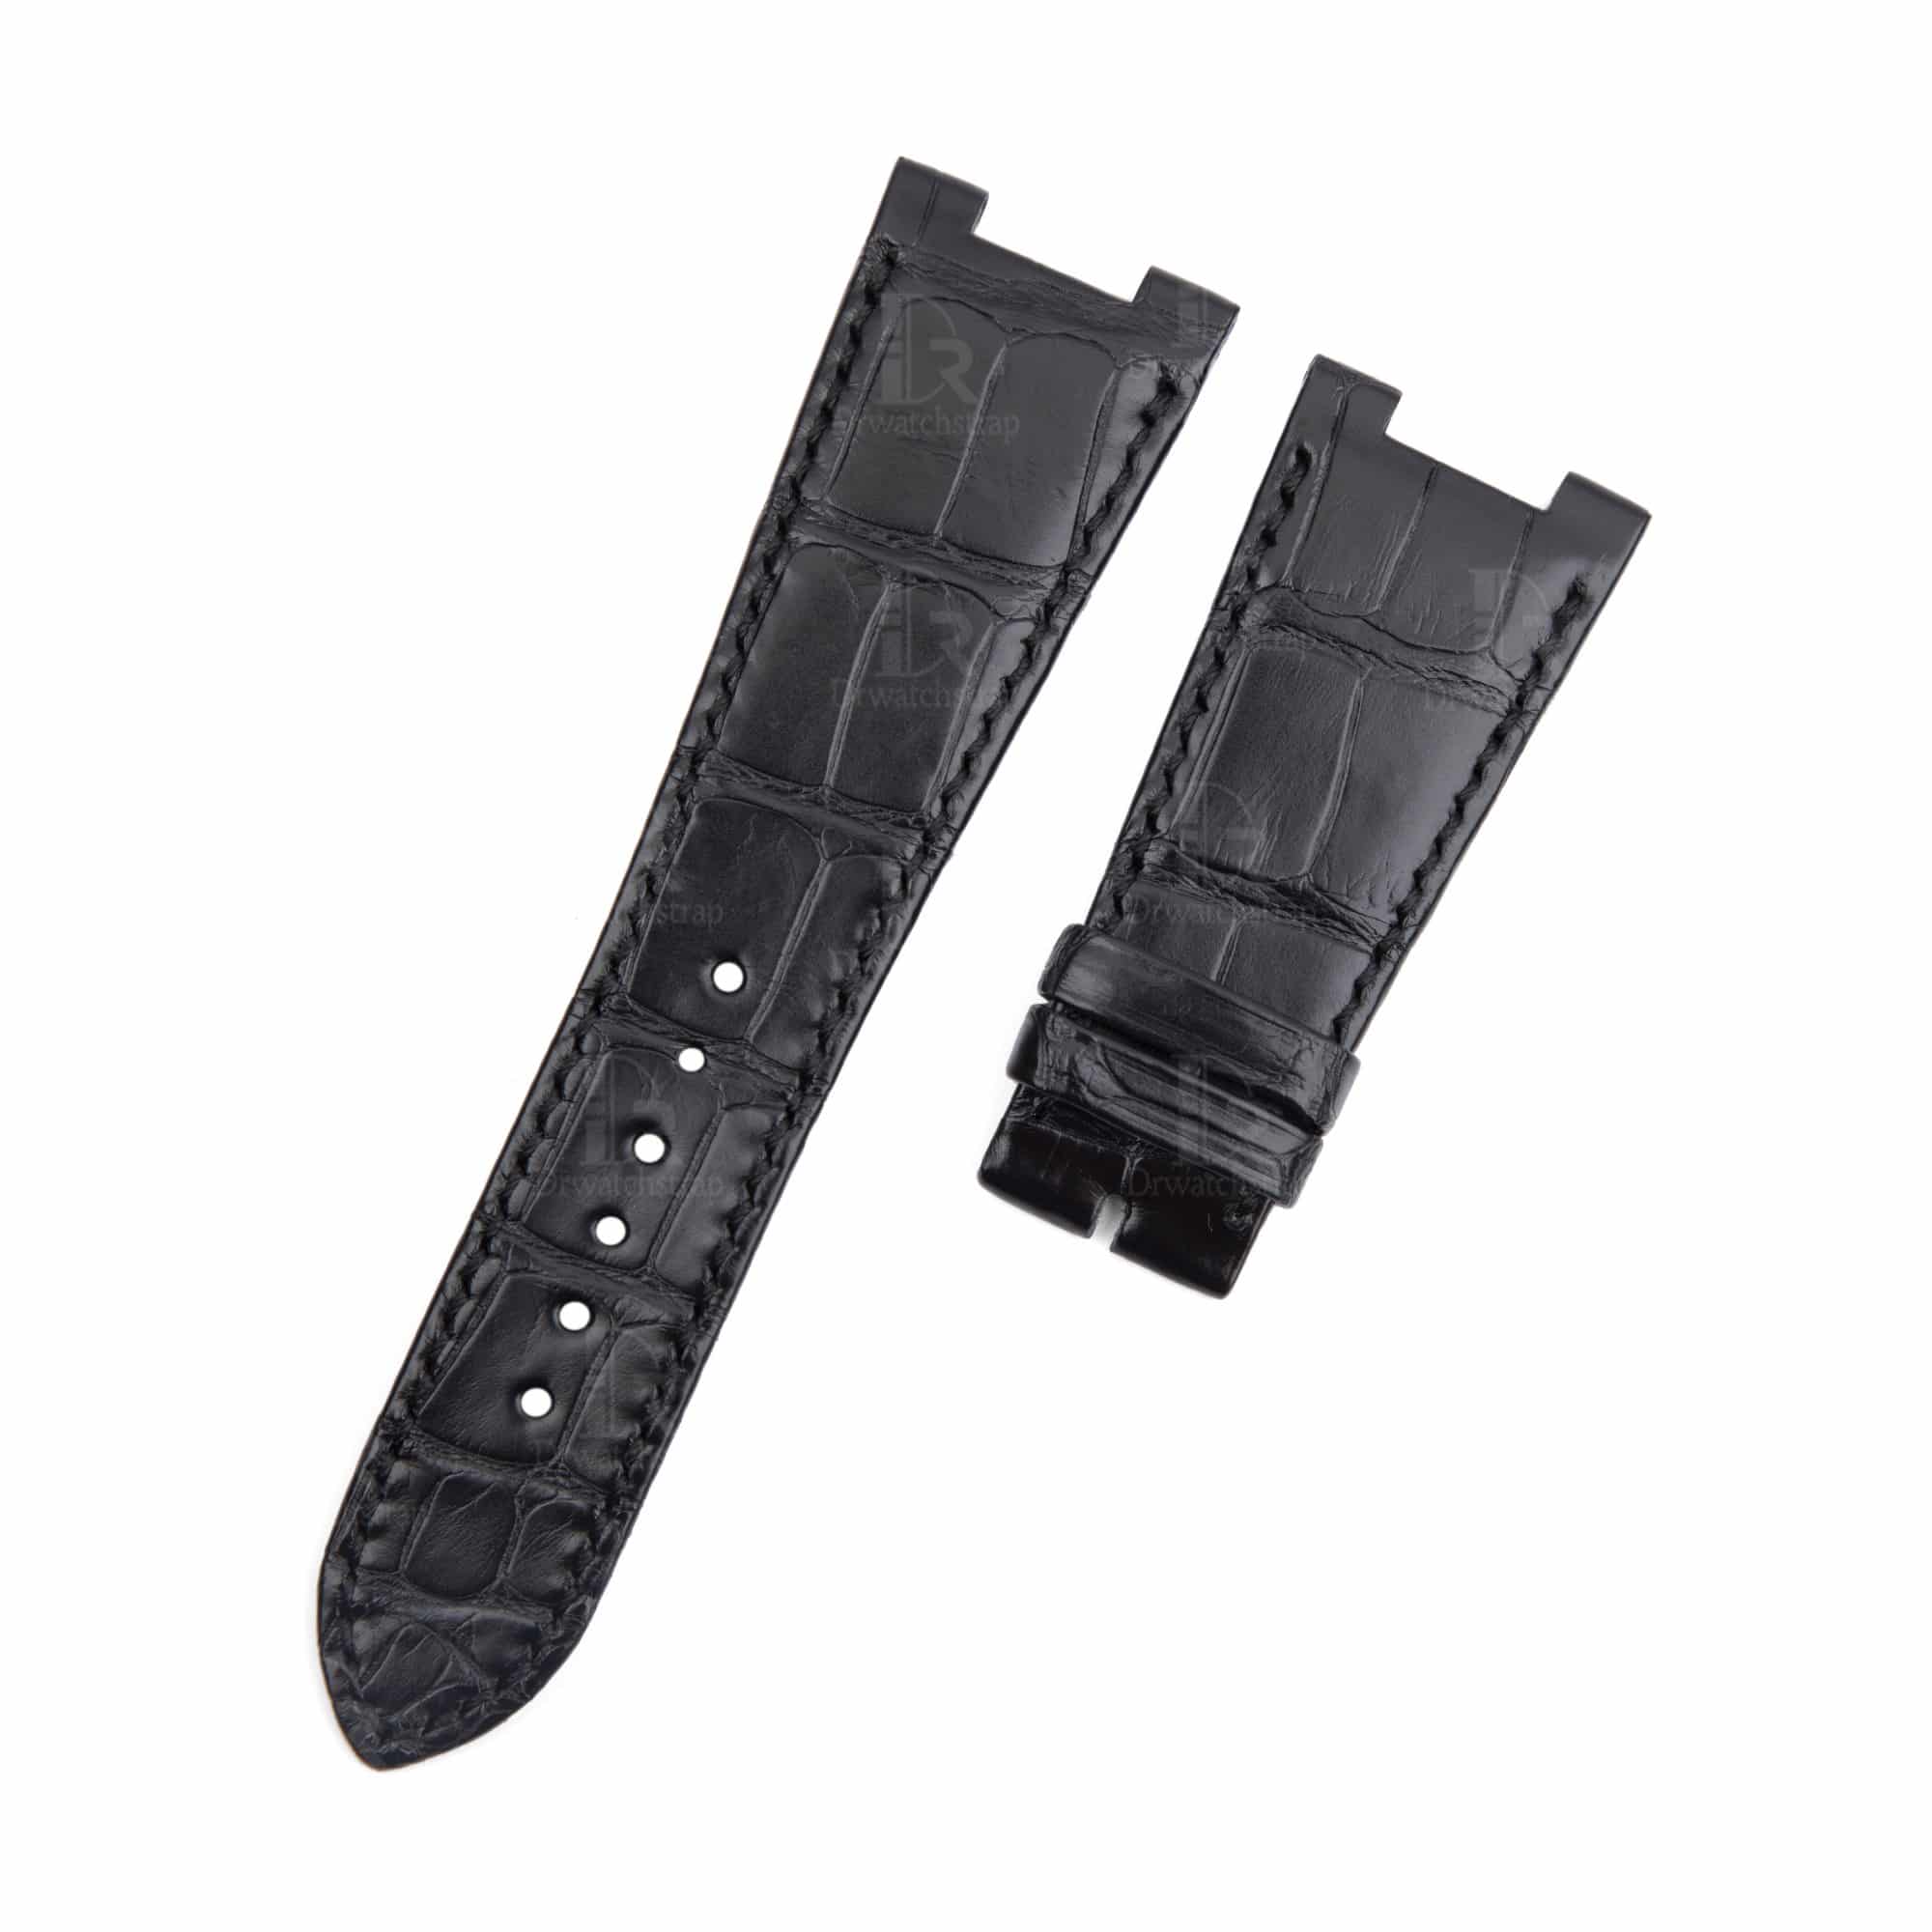 Replacement Patek Philippe Nautilus 5711 leather strap for sale - 25mm Lug Size Custom handmade American Alligator Black leather watch band